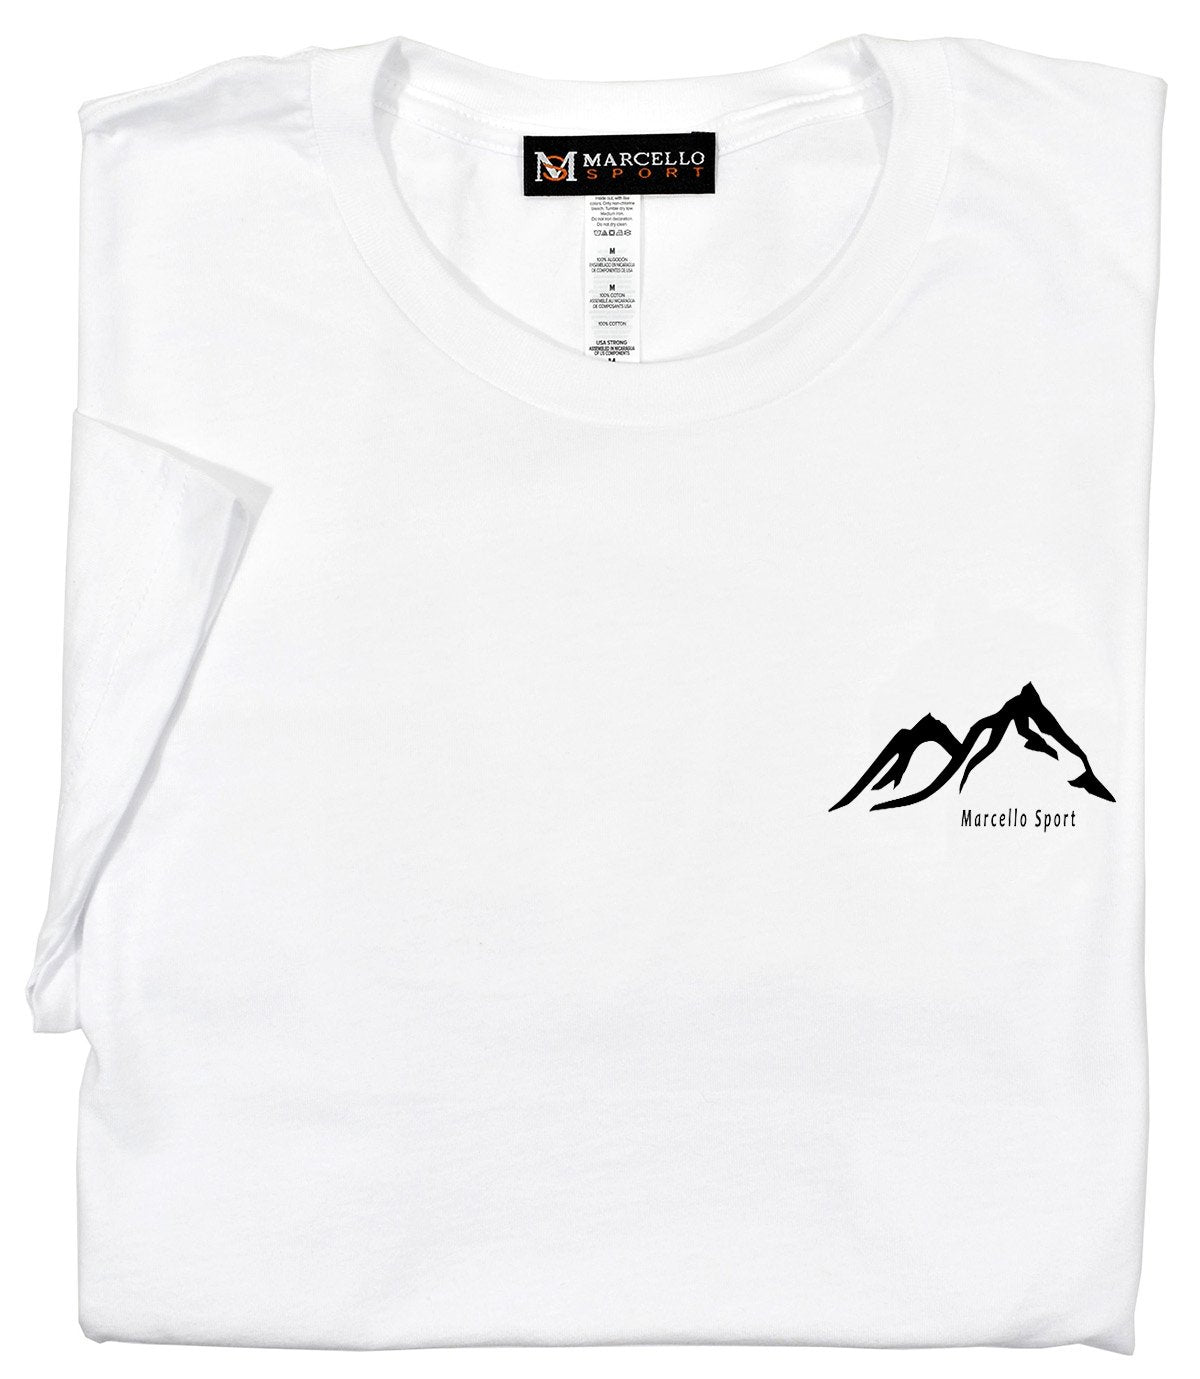 Marcello Ski Bum Tee  100% soft cotton, preshrunk. Soft luxe cotton. Contemporary fit, we suggest ordering one size up if between sizes or prefer a looser fit. Machine wash and dry.